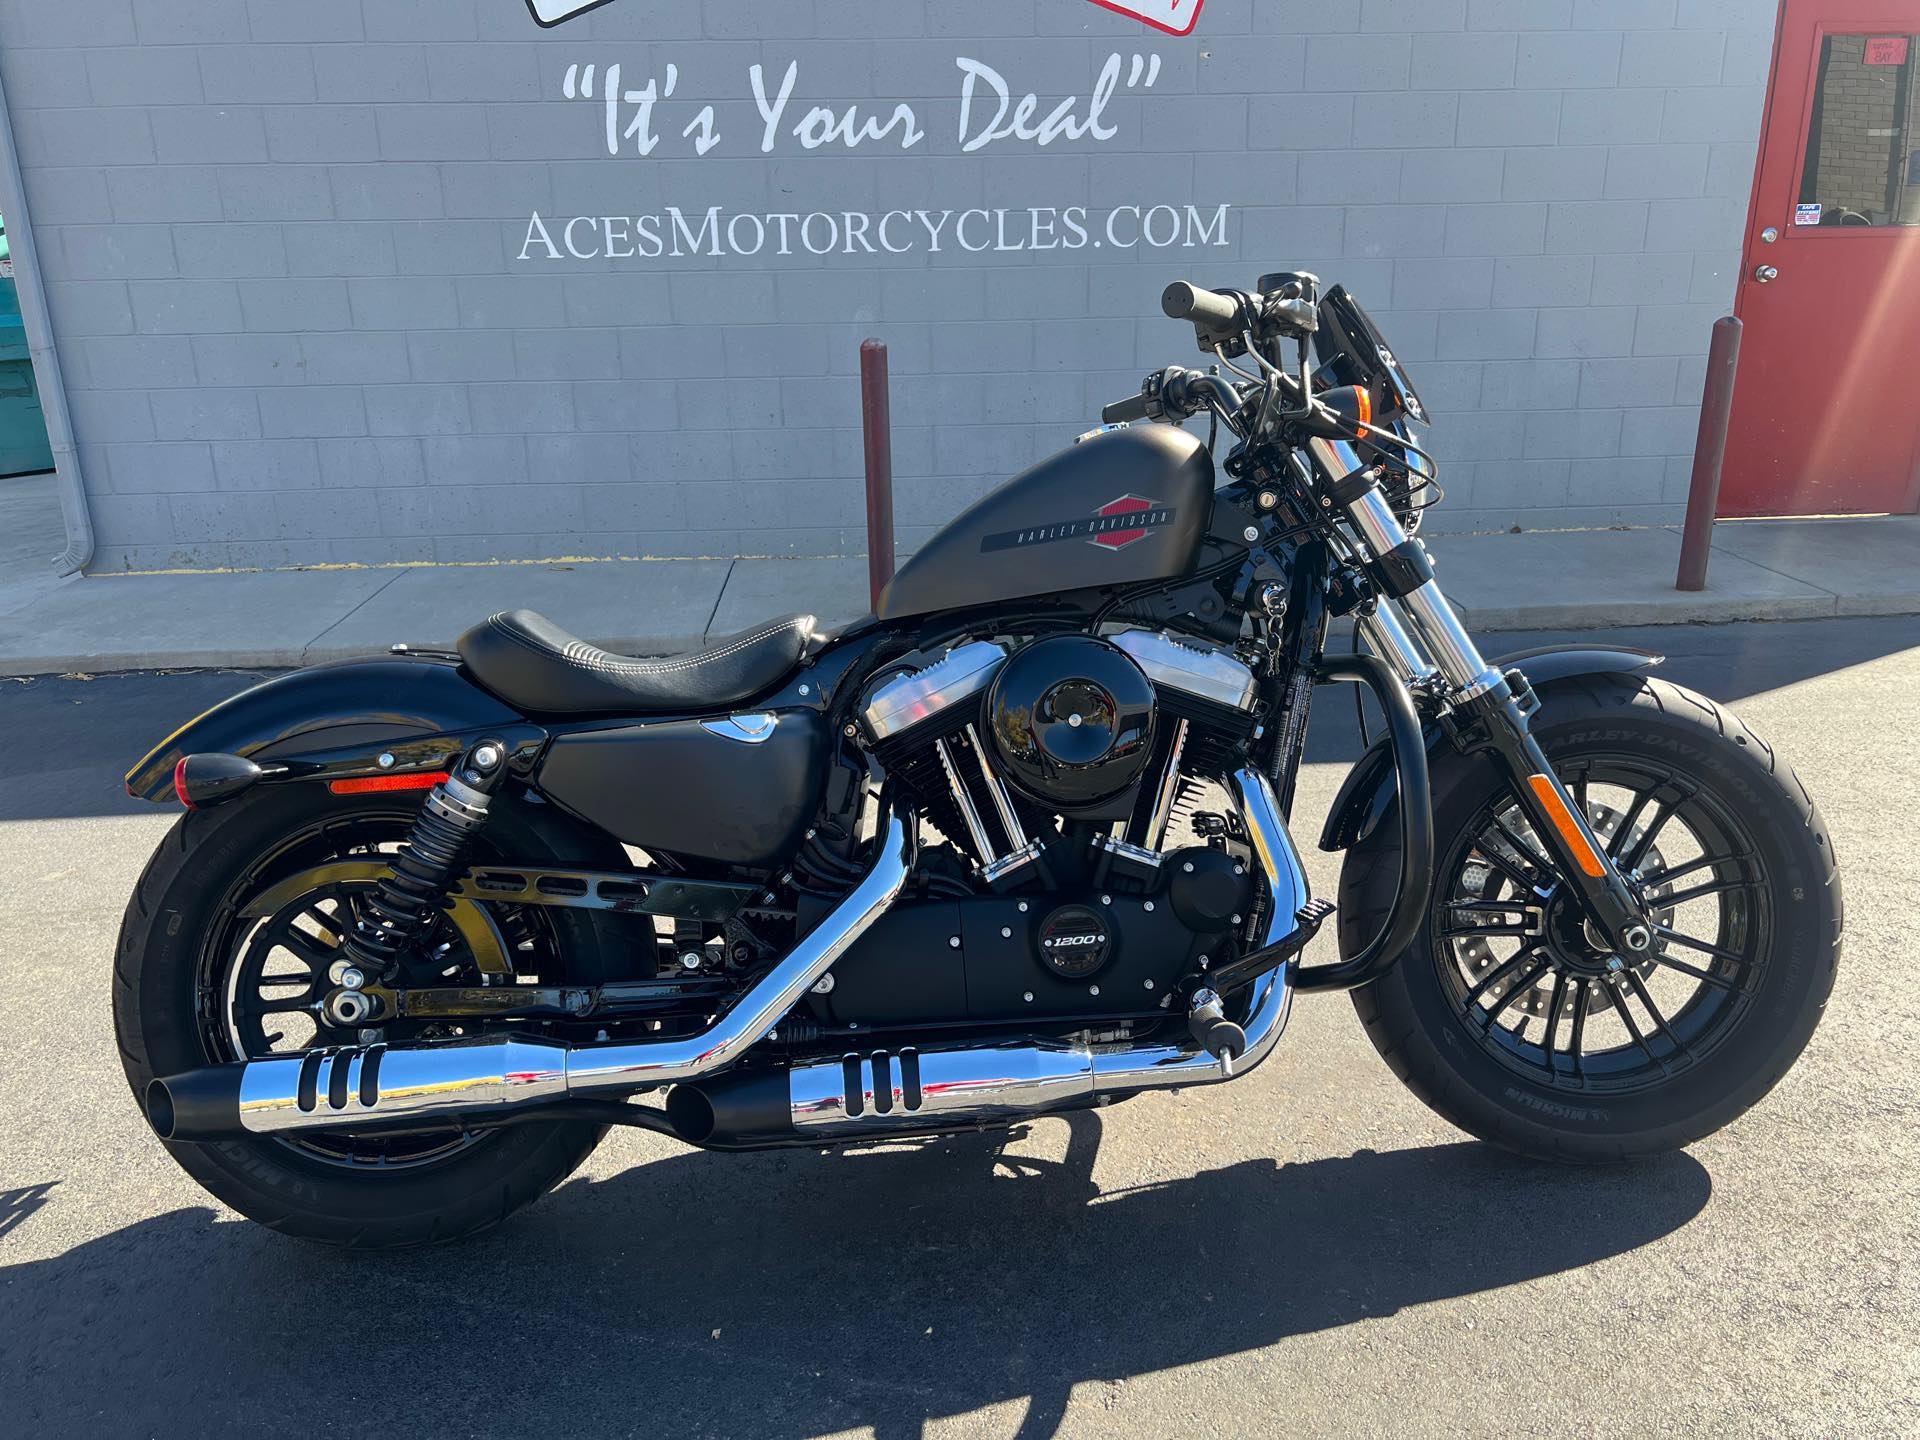 2020 Harley-Davidson Sportster Forty-Eight at Aces Motorcycles - Fort Collins